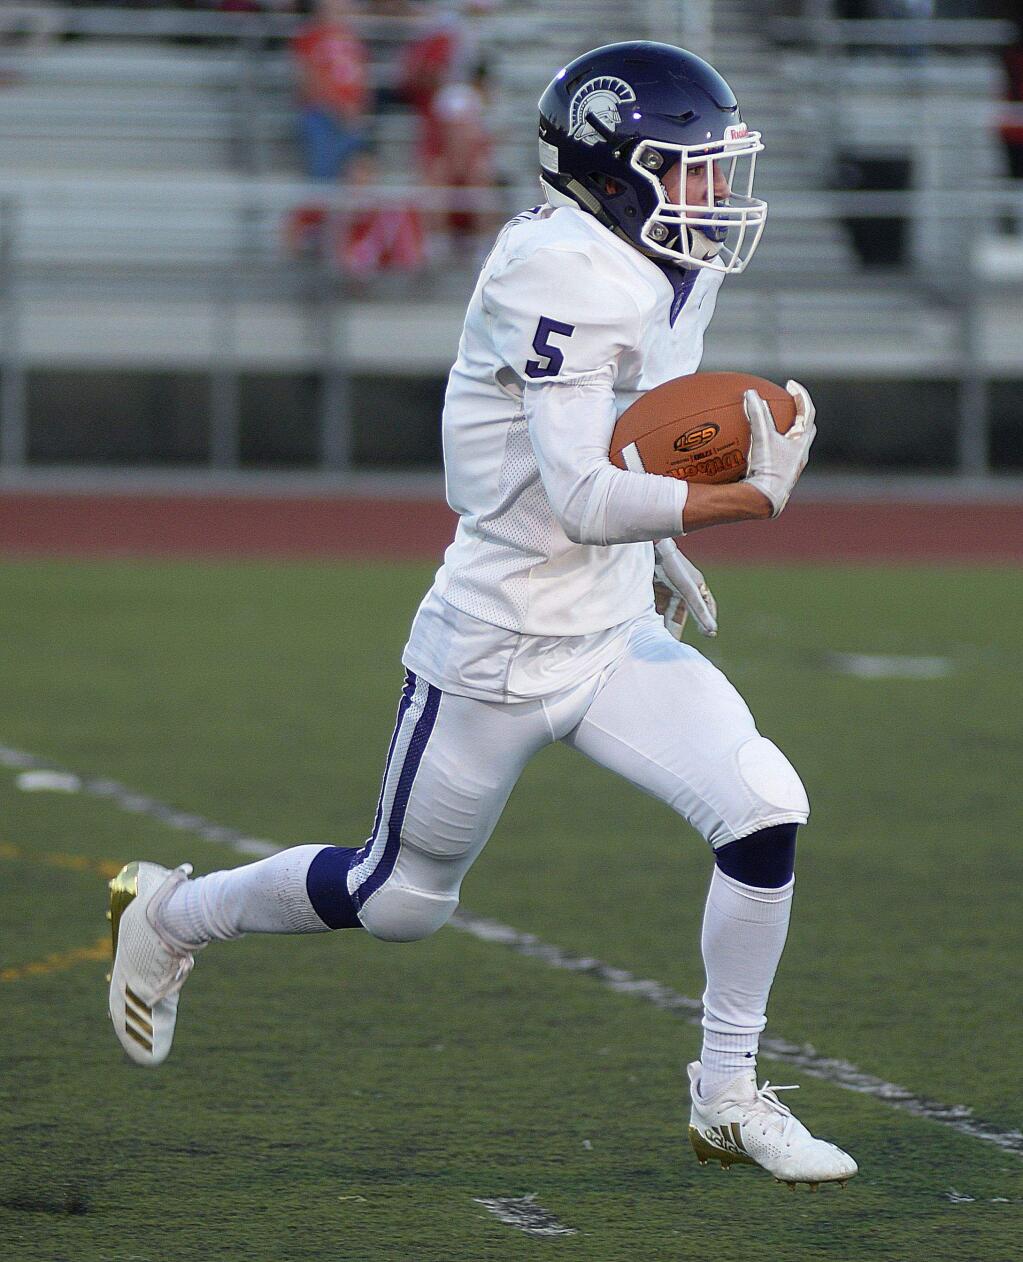 SUMNER FOWLER/FOR THE ARGUS-COURIERGarrett Freitas led another Petaluma win over Montgomery, intercepting two passes and breaking a 61-yard touchdown run.